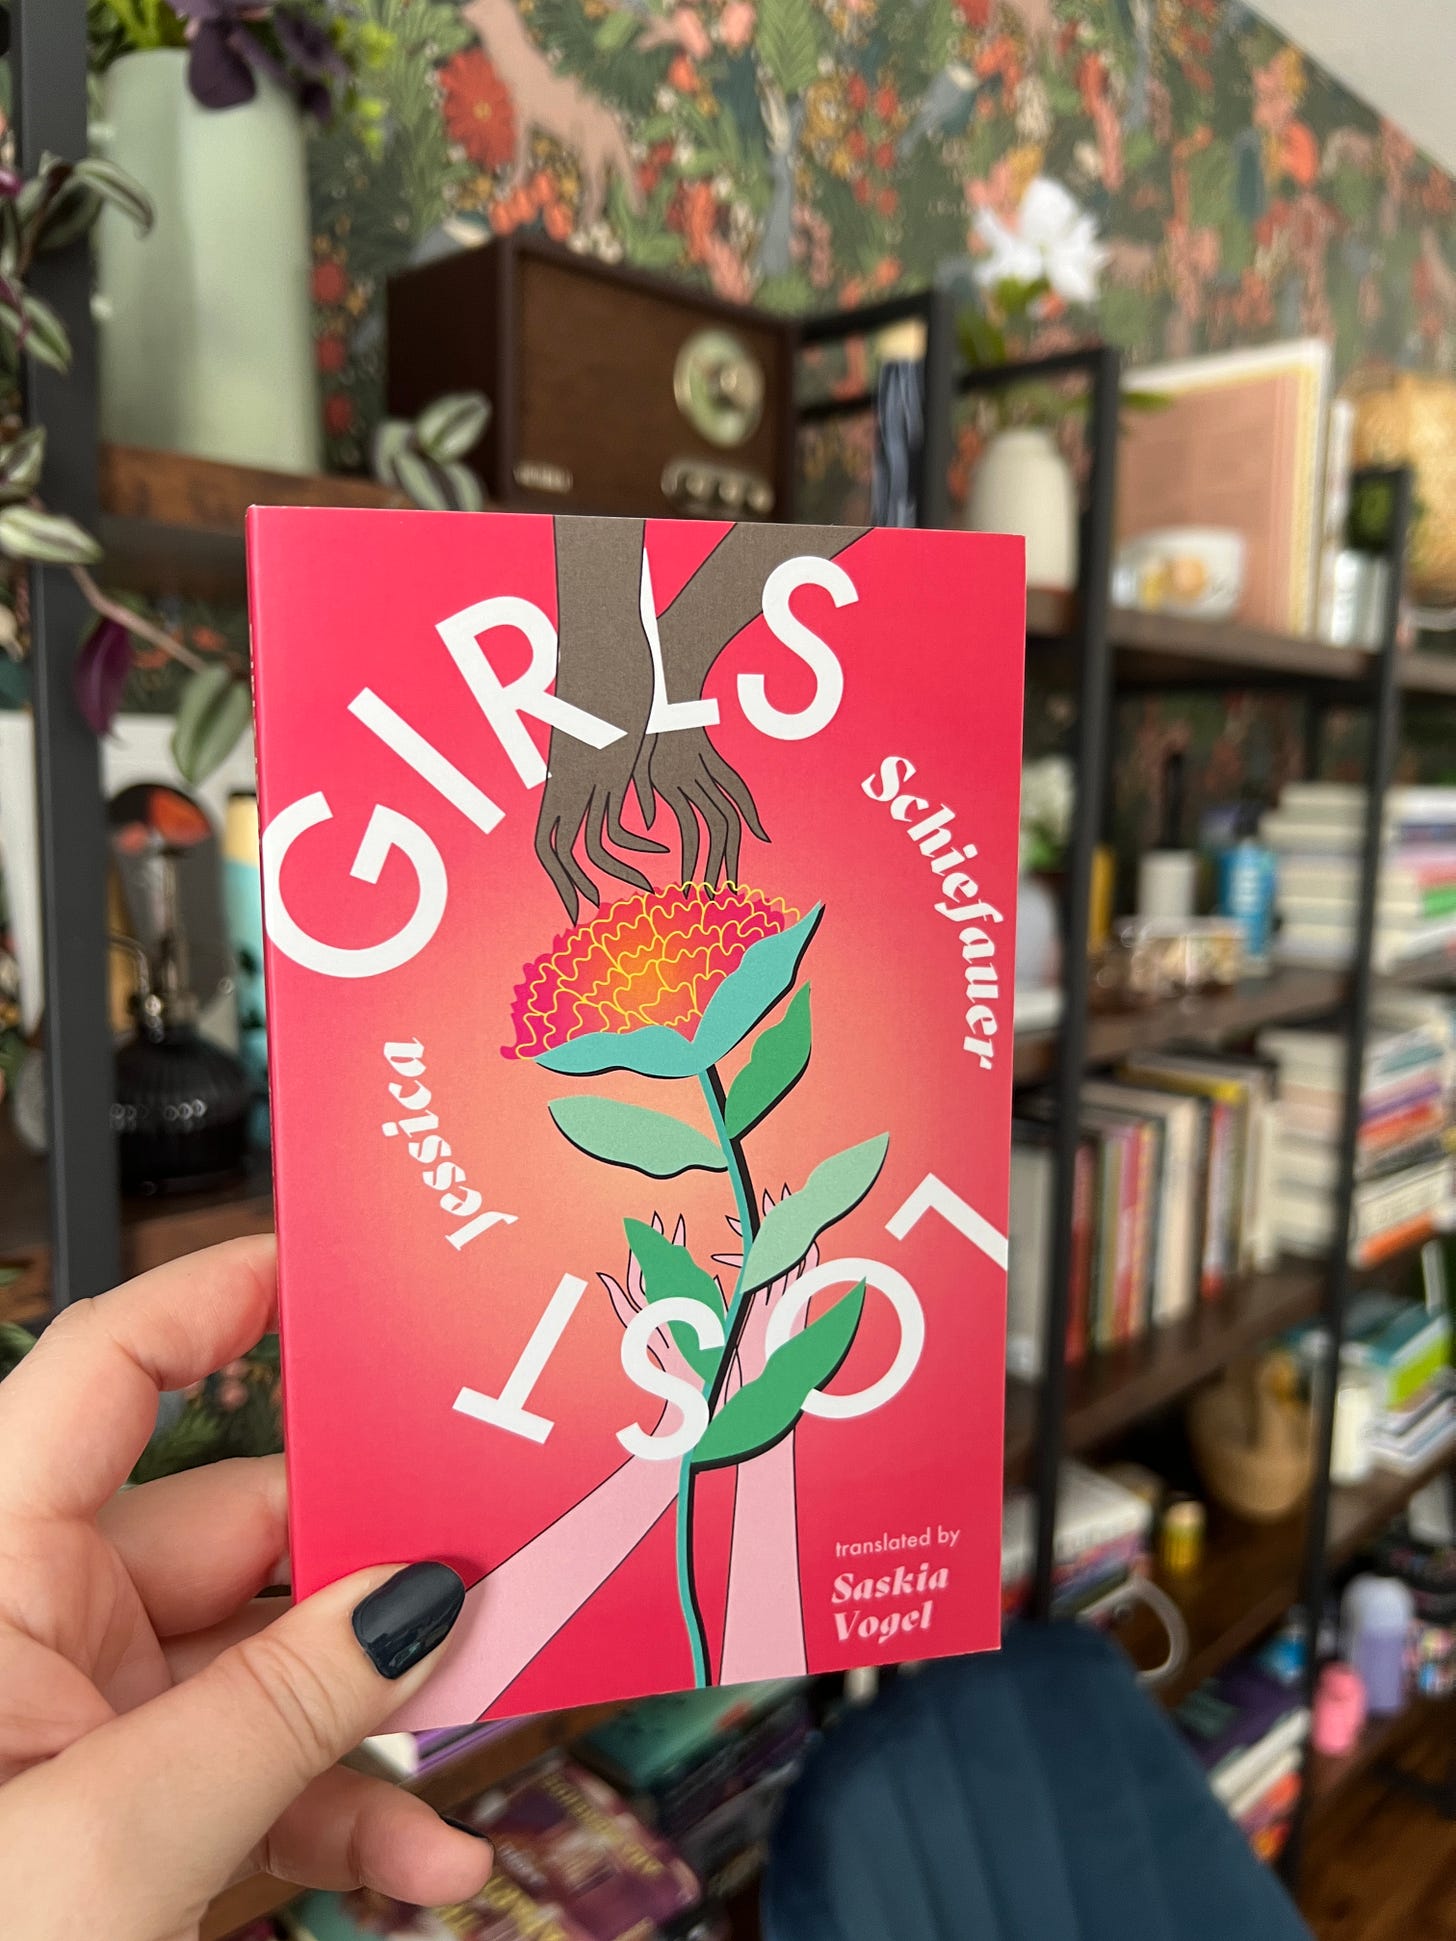 My hand (a white hand) holding a copy of Girls Lost in front of a full bookshelf with plants and books. 